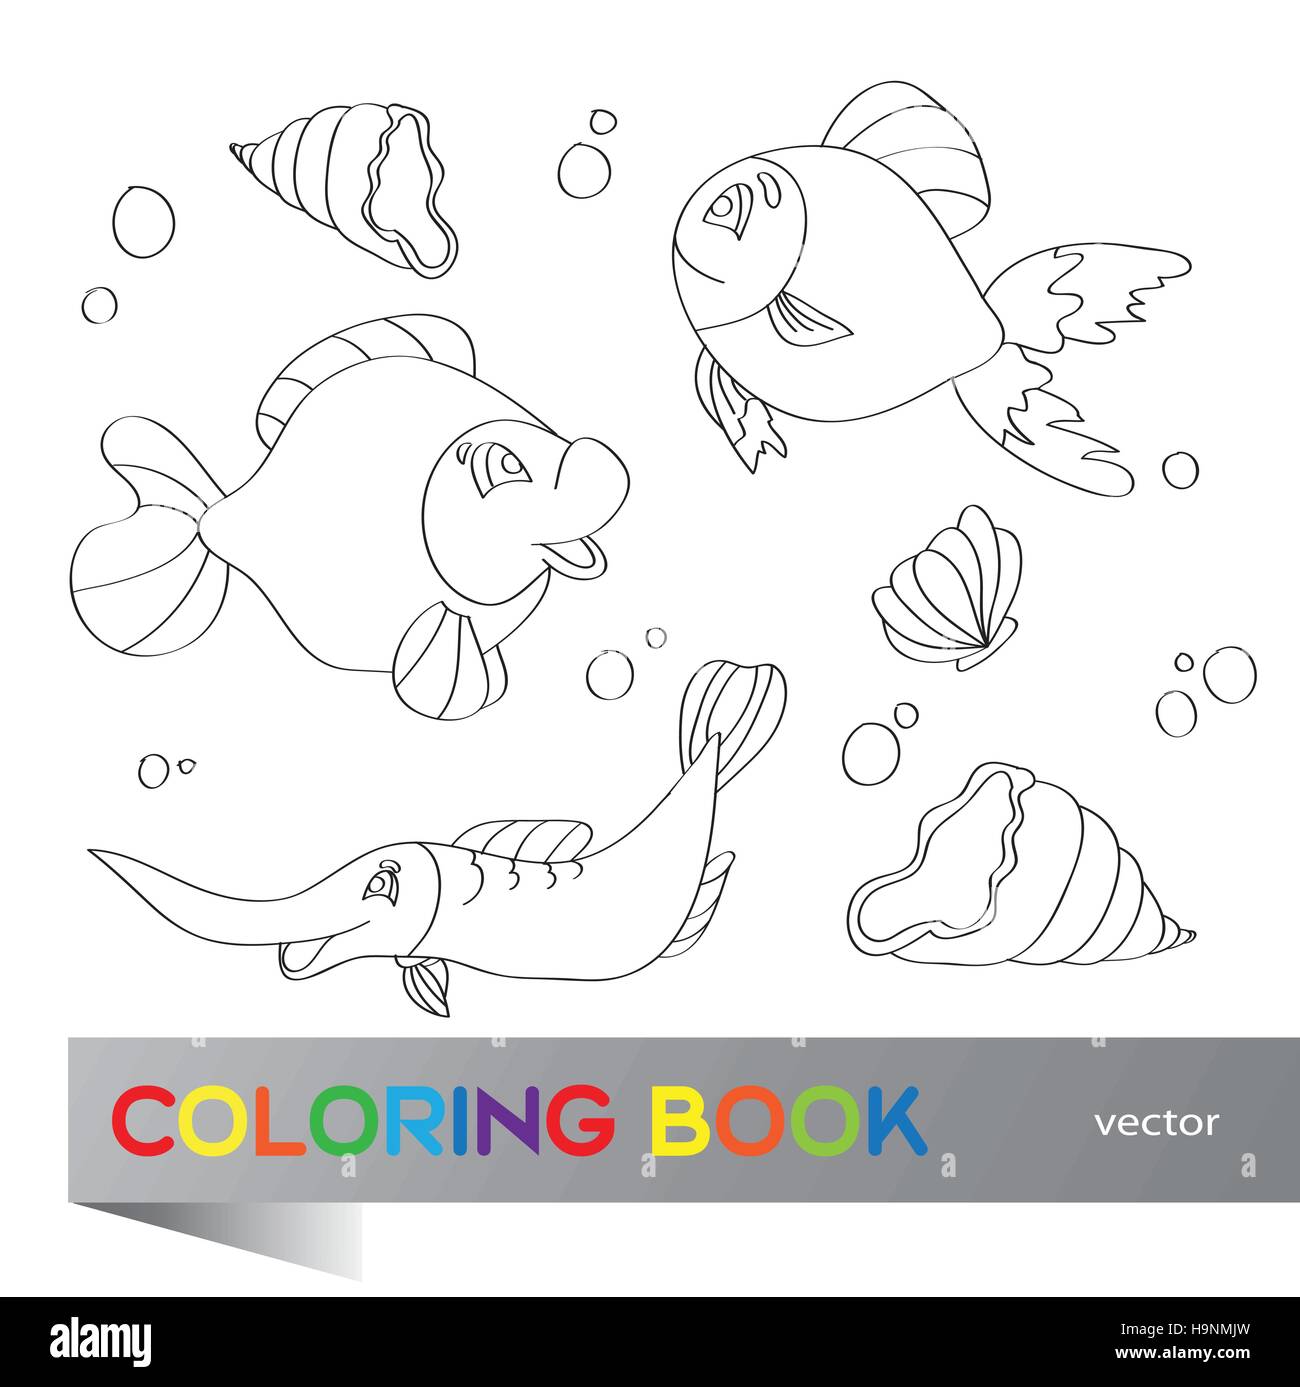 Coloring book - set of images of the marine life Stock Vector